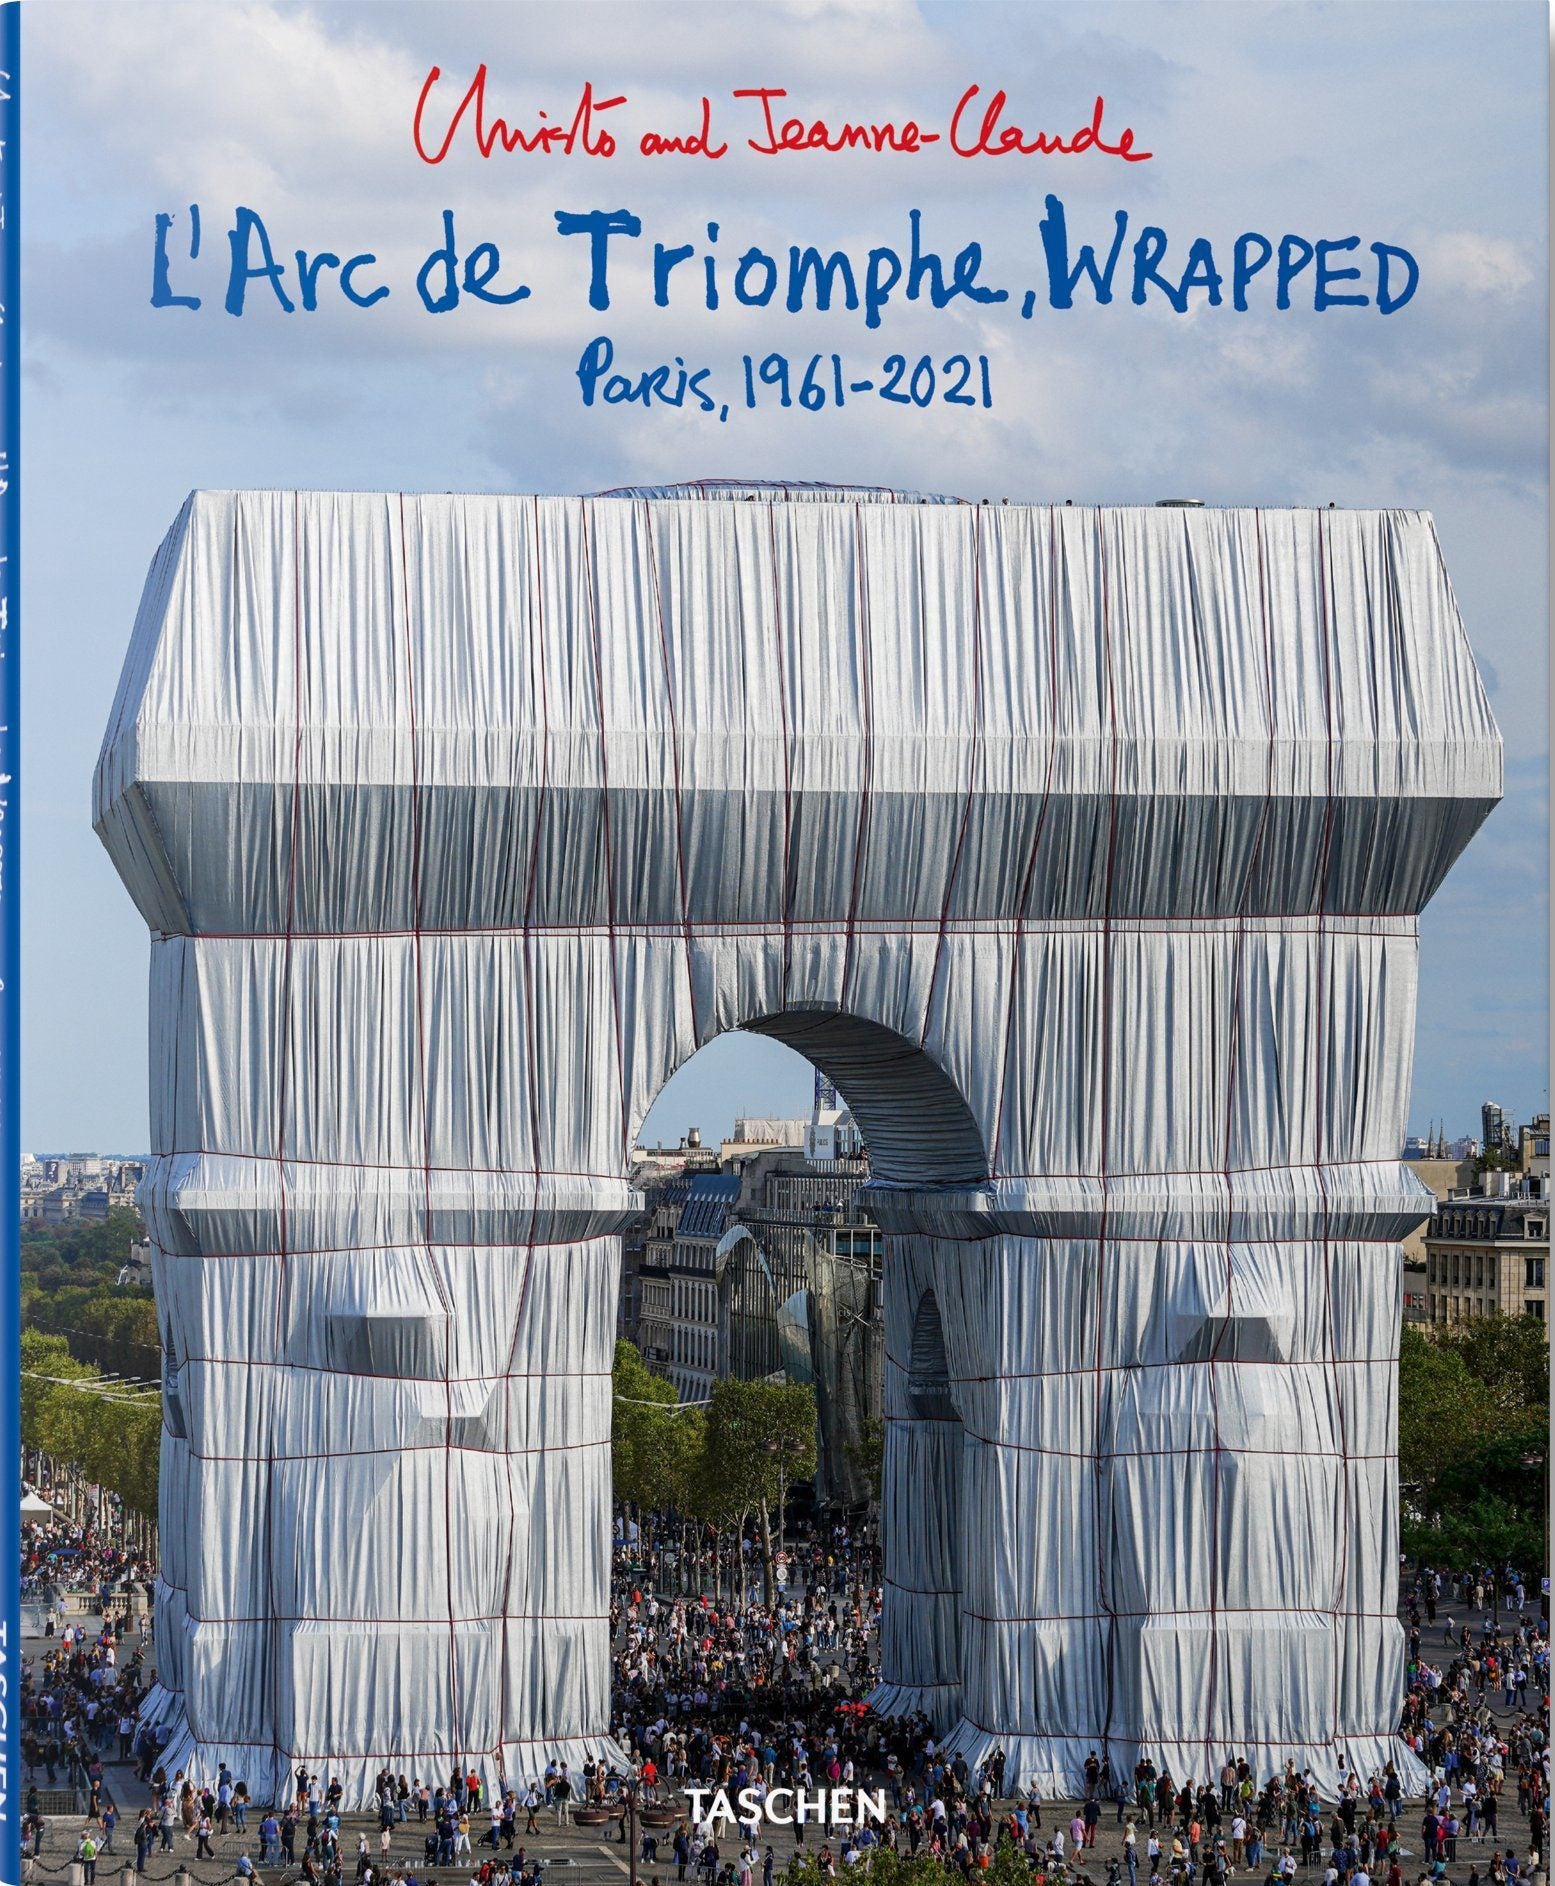 Christo and Jeanne-Claude, L’Arc de Triomphe, Wrapped